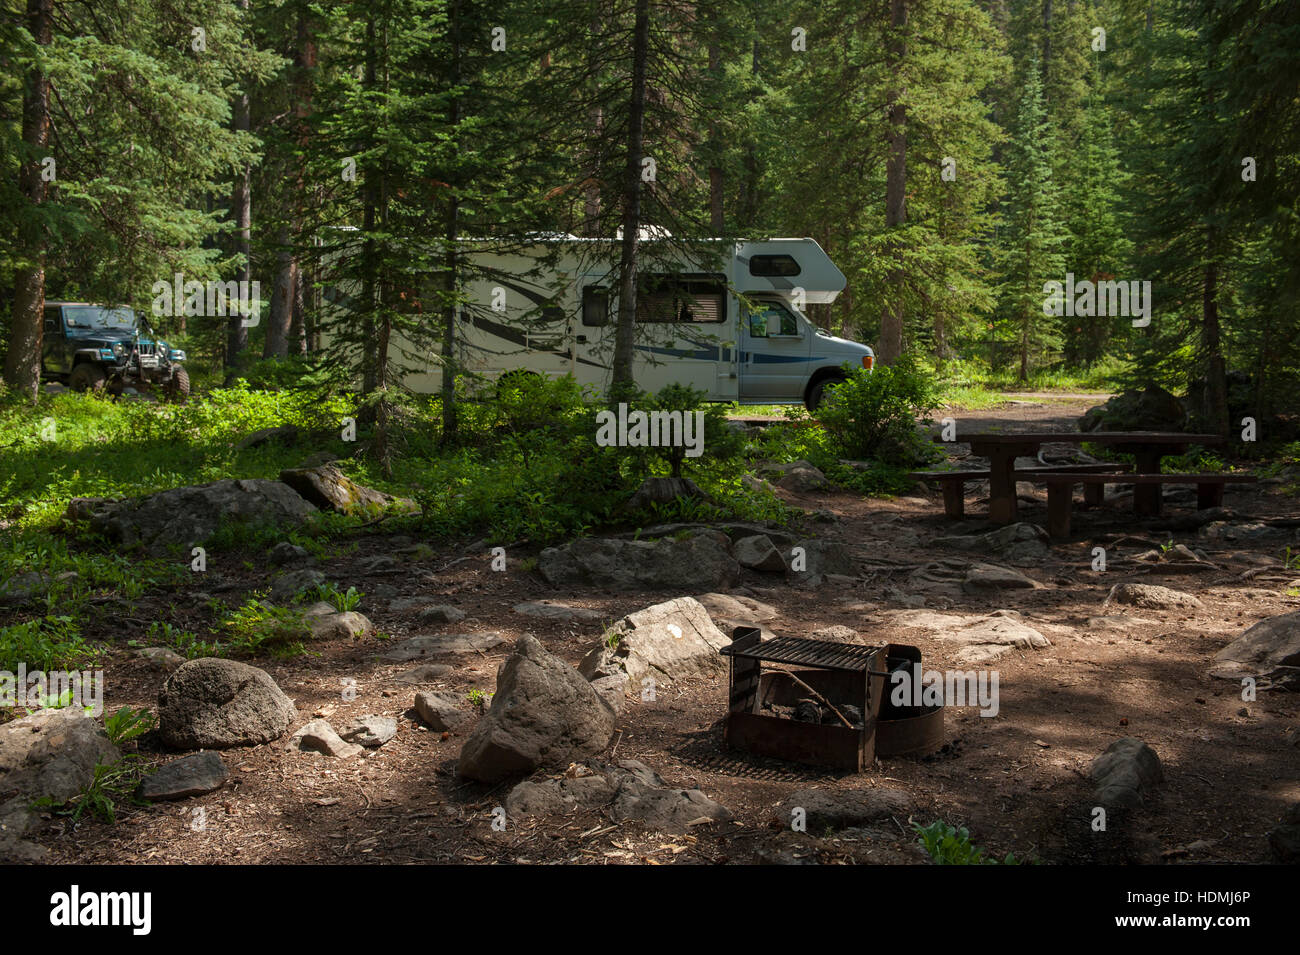 A Recreational Vehicle (RV) and Jeep at a Forest Service camp site. Stock Photo